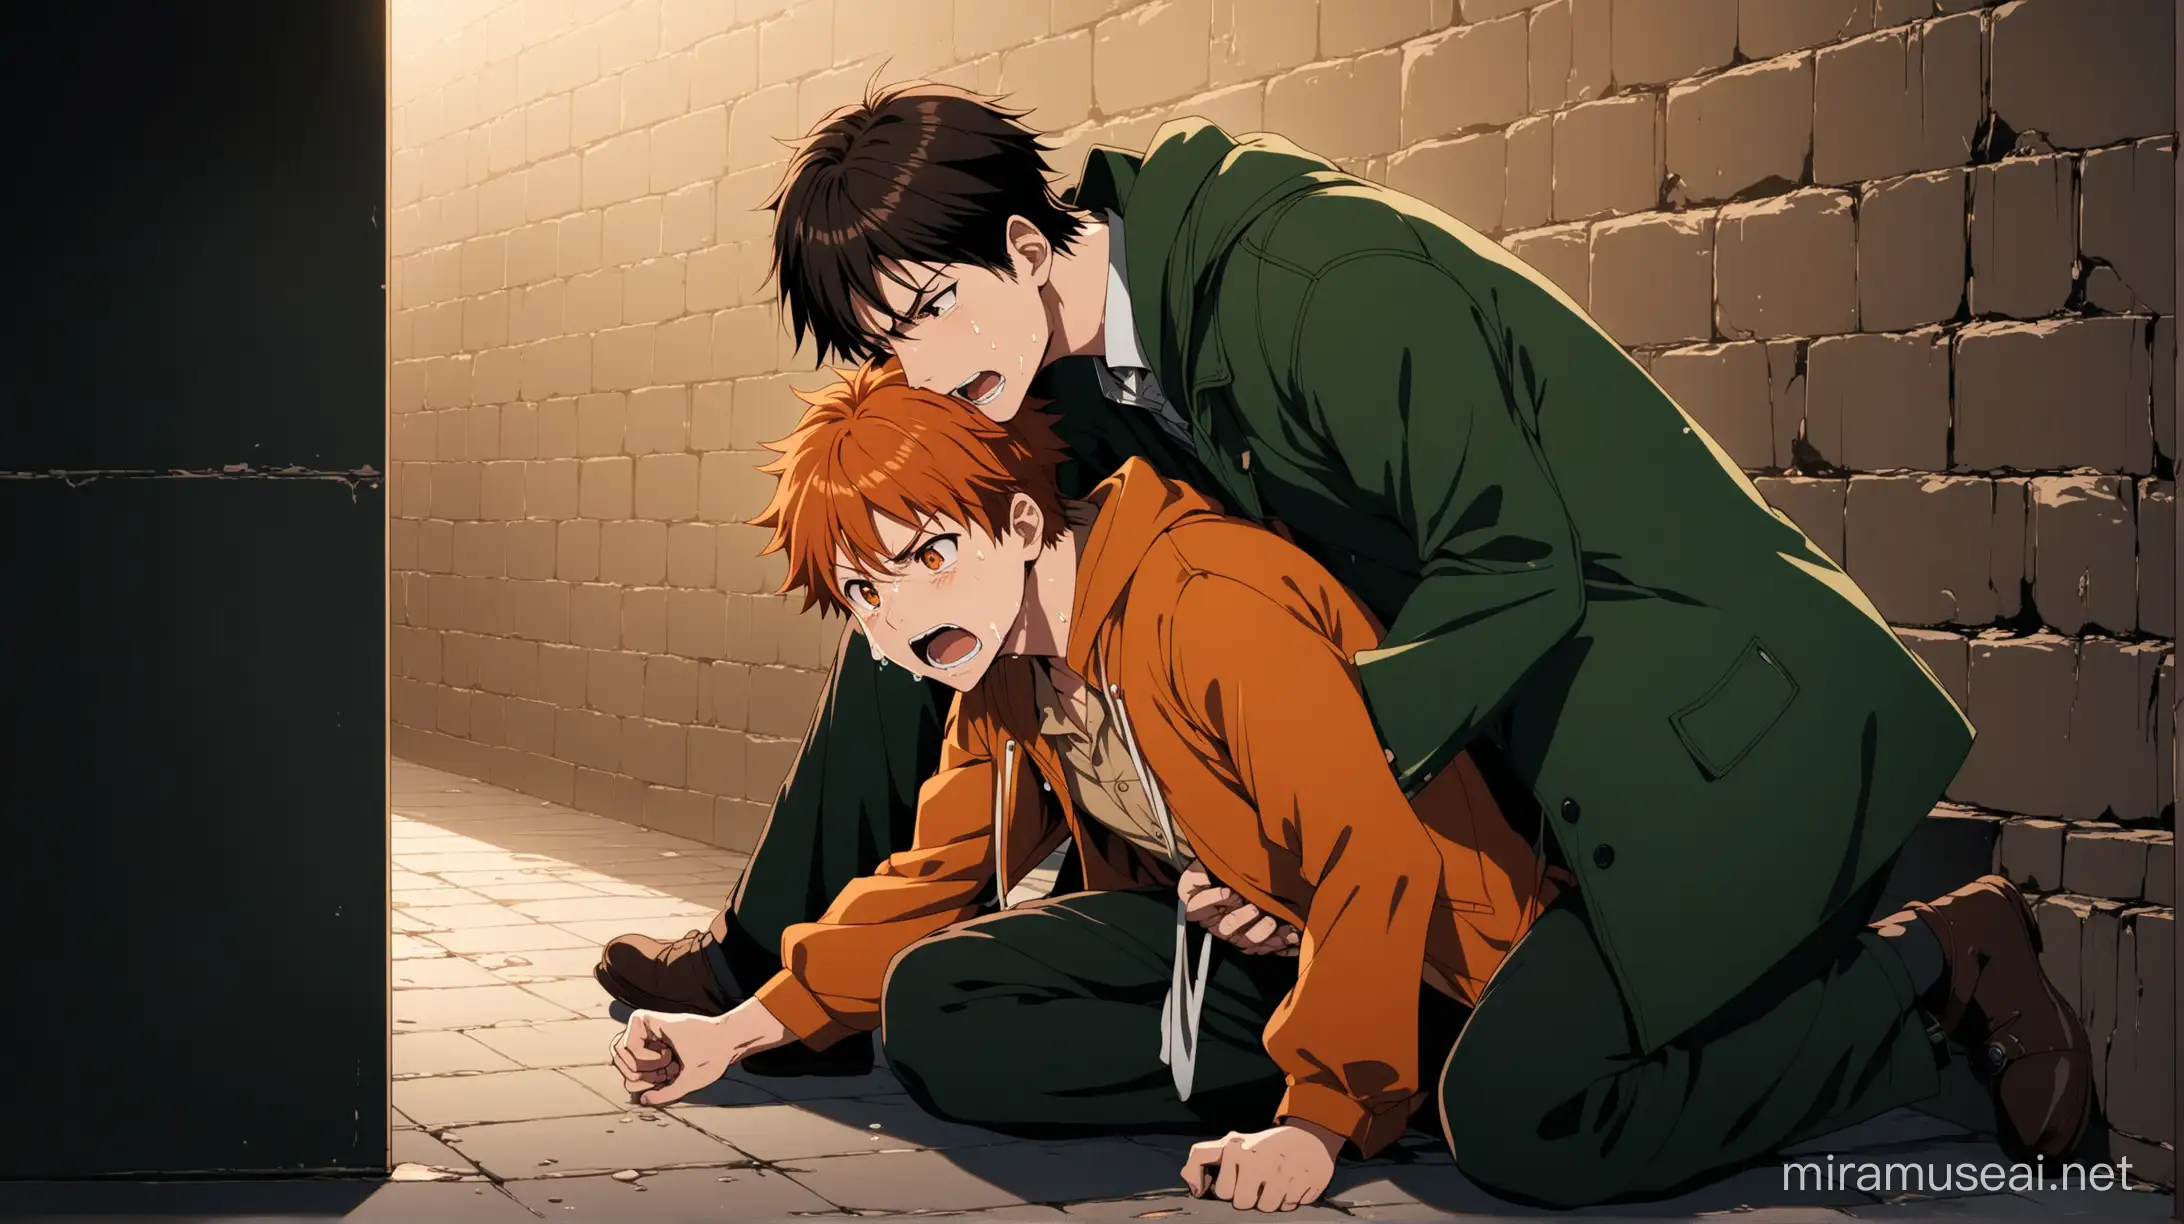 A cinematic shot image of an two anime characters in which the first pushed second character with his handcuffed hands while sitting on the floor of an underground secret room with dark green contrasts and vibe. The first character is the dad, male, detective, injured badly, injured face, dark brown headed, orange eyes, wearing detective clothes without hat, brown detective clothes. The second character is been pushed by the first anime character. The second character is son, boy, crying, screaming, orange headed, wearing dark green hoodie, handsome, orange eyes. The image is front full body image of first character pushing the crying second character. The first  character is injured badly sitting on the floor supporting a wall 